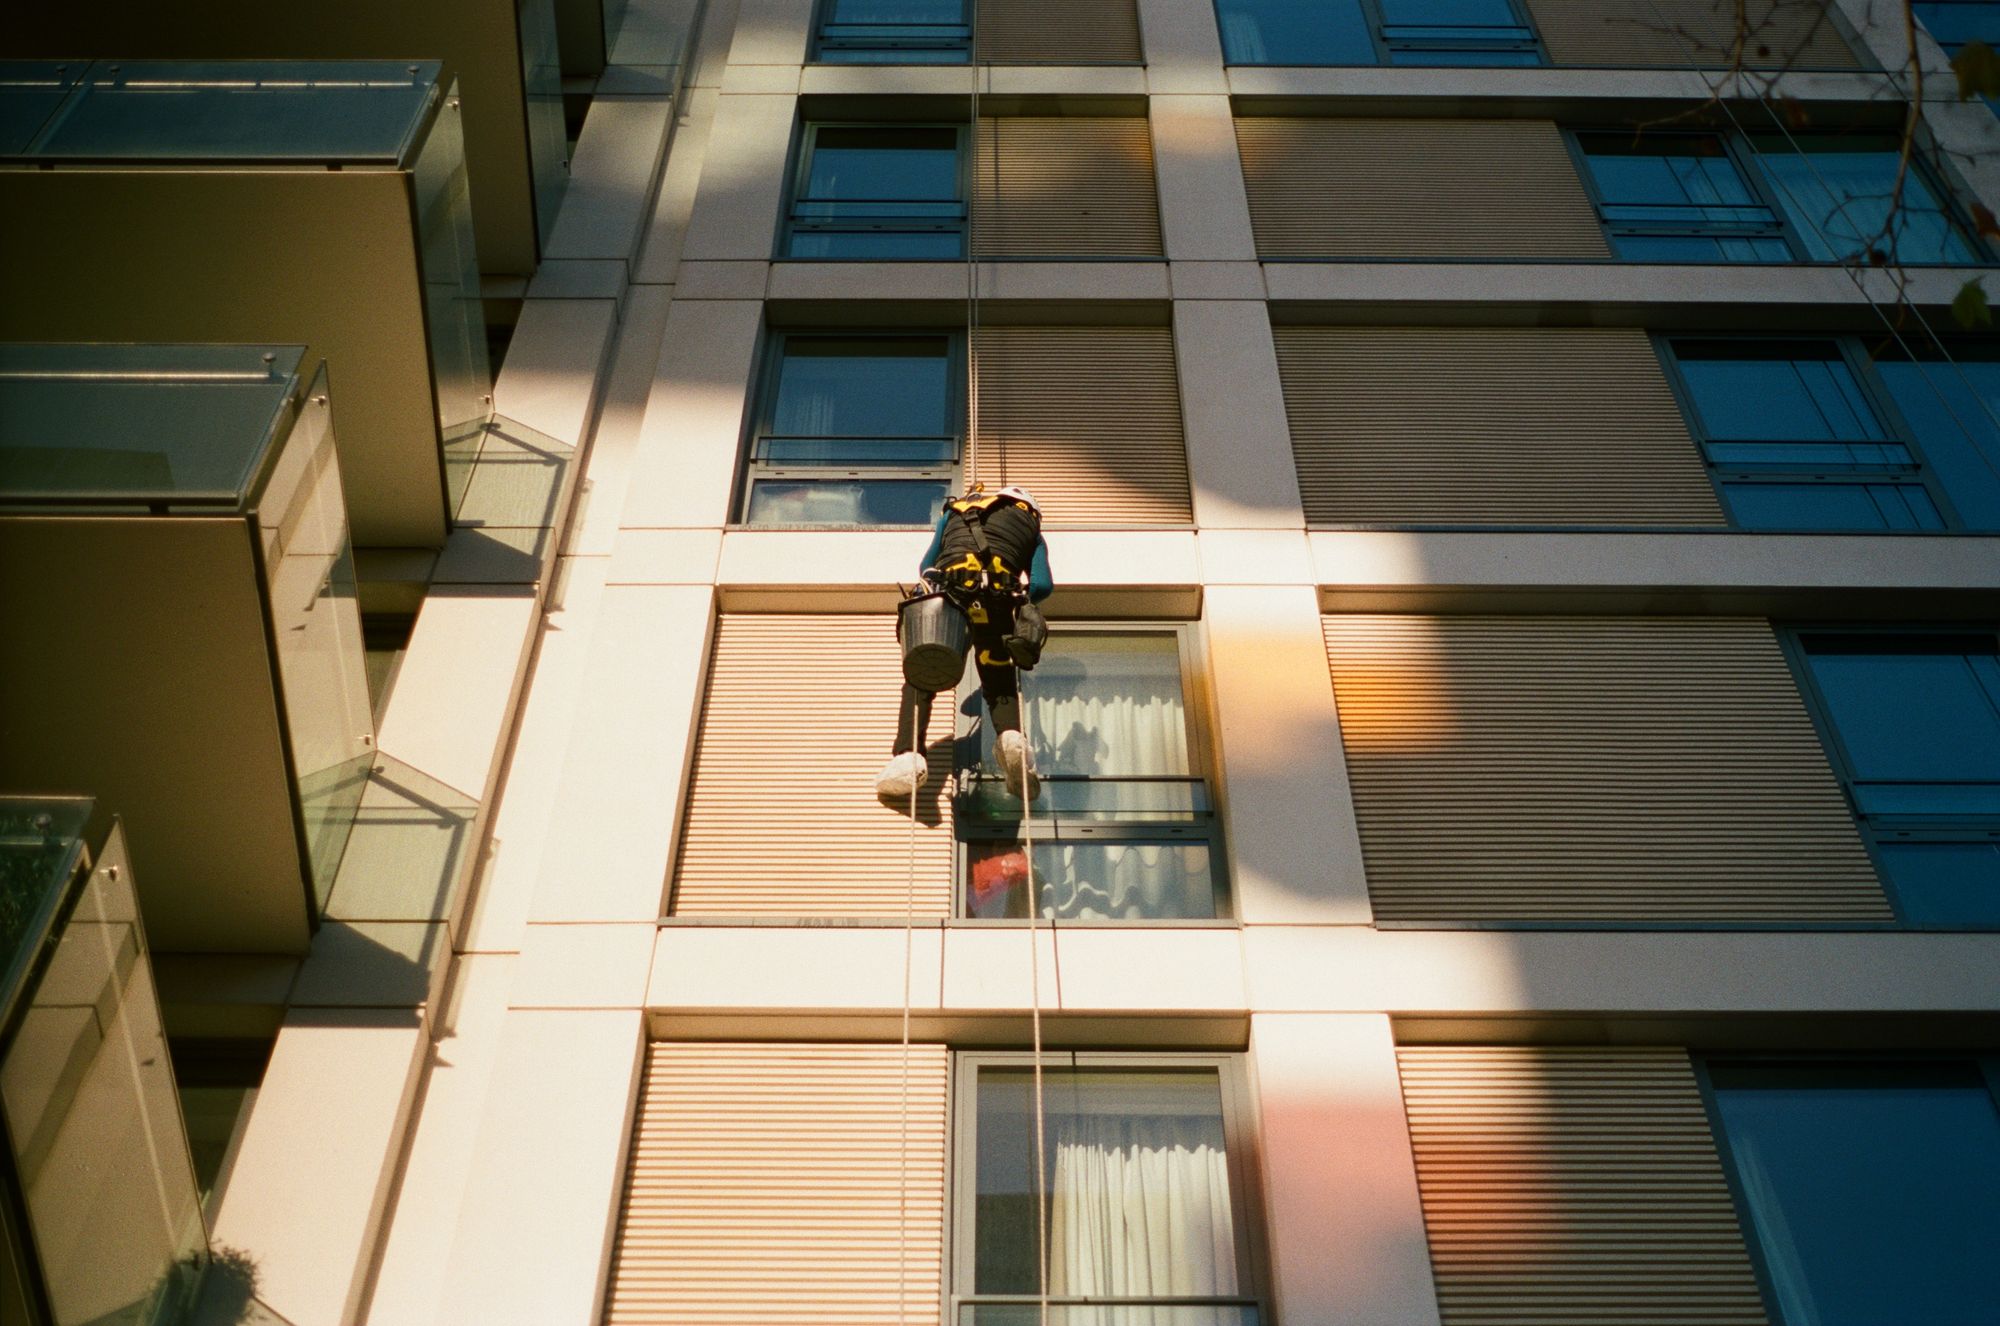 A window cleaner abseiling down the side of a block of flats with wooden slat cladding in a pool of light cast through glass balcony balustrades. He carries a bucket, wears a white helmet, a black gilet, and white oversells over his shoes.